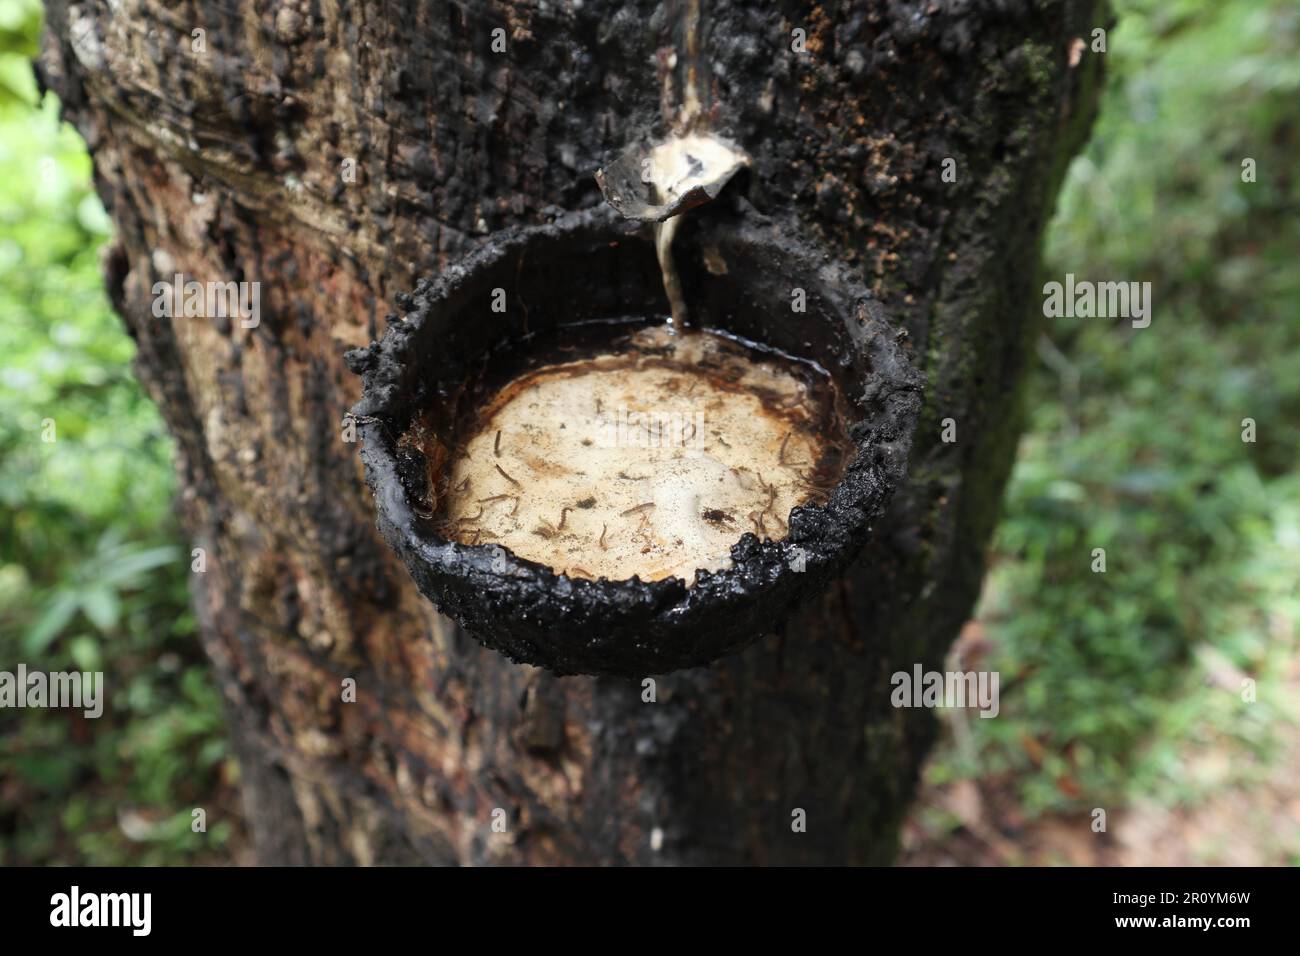 Closeup view of a rubber collection bowl (coconut shell) that has failed to collect latex. It is now filled with clear rainwater and the breeding mosq Stock Photo